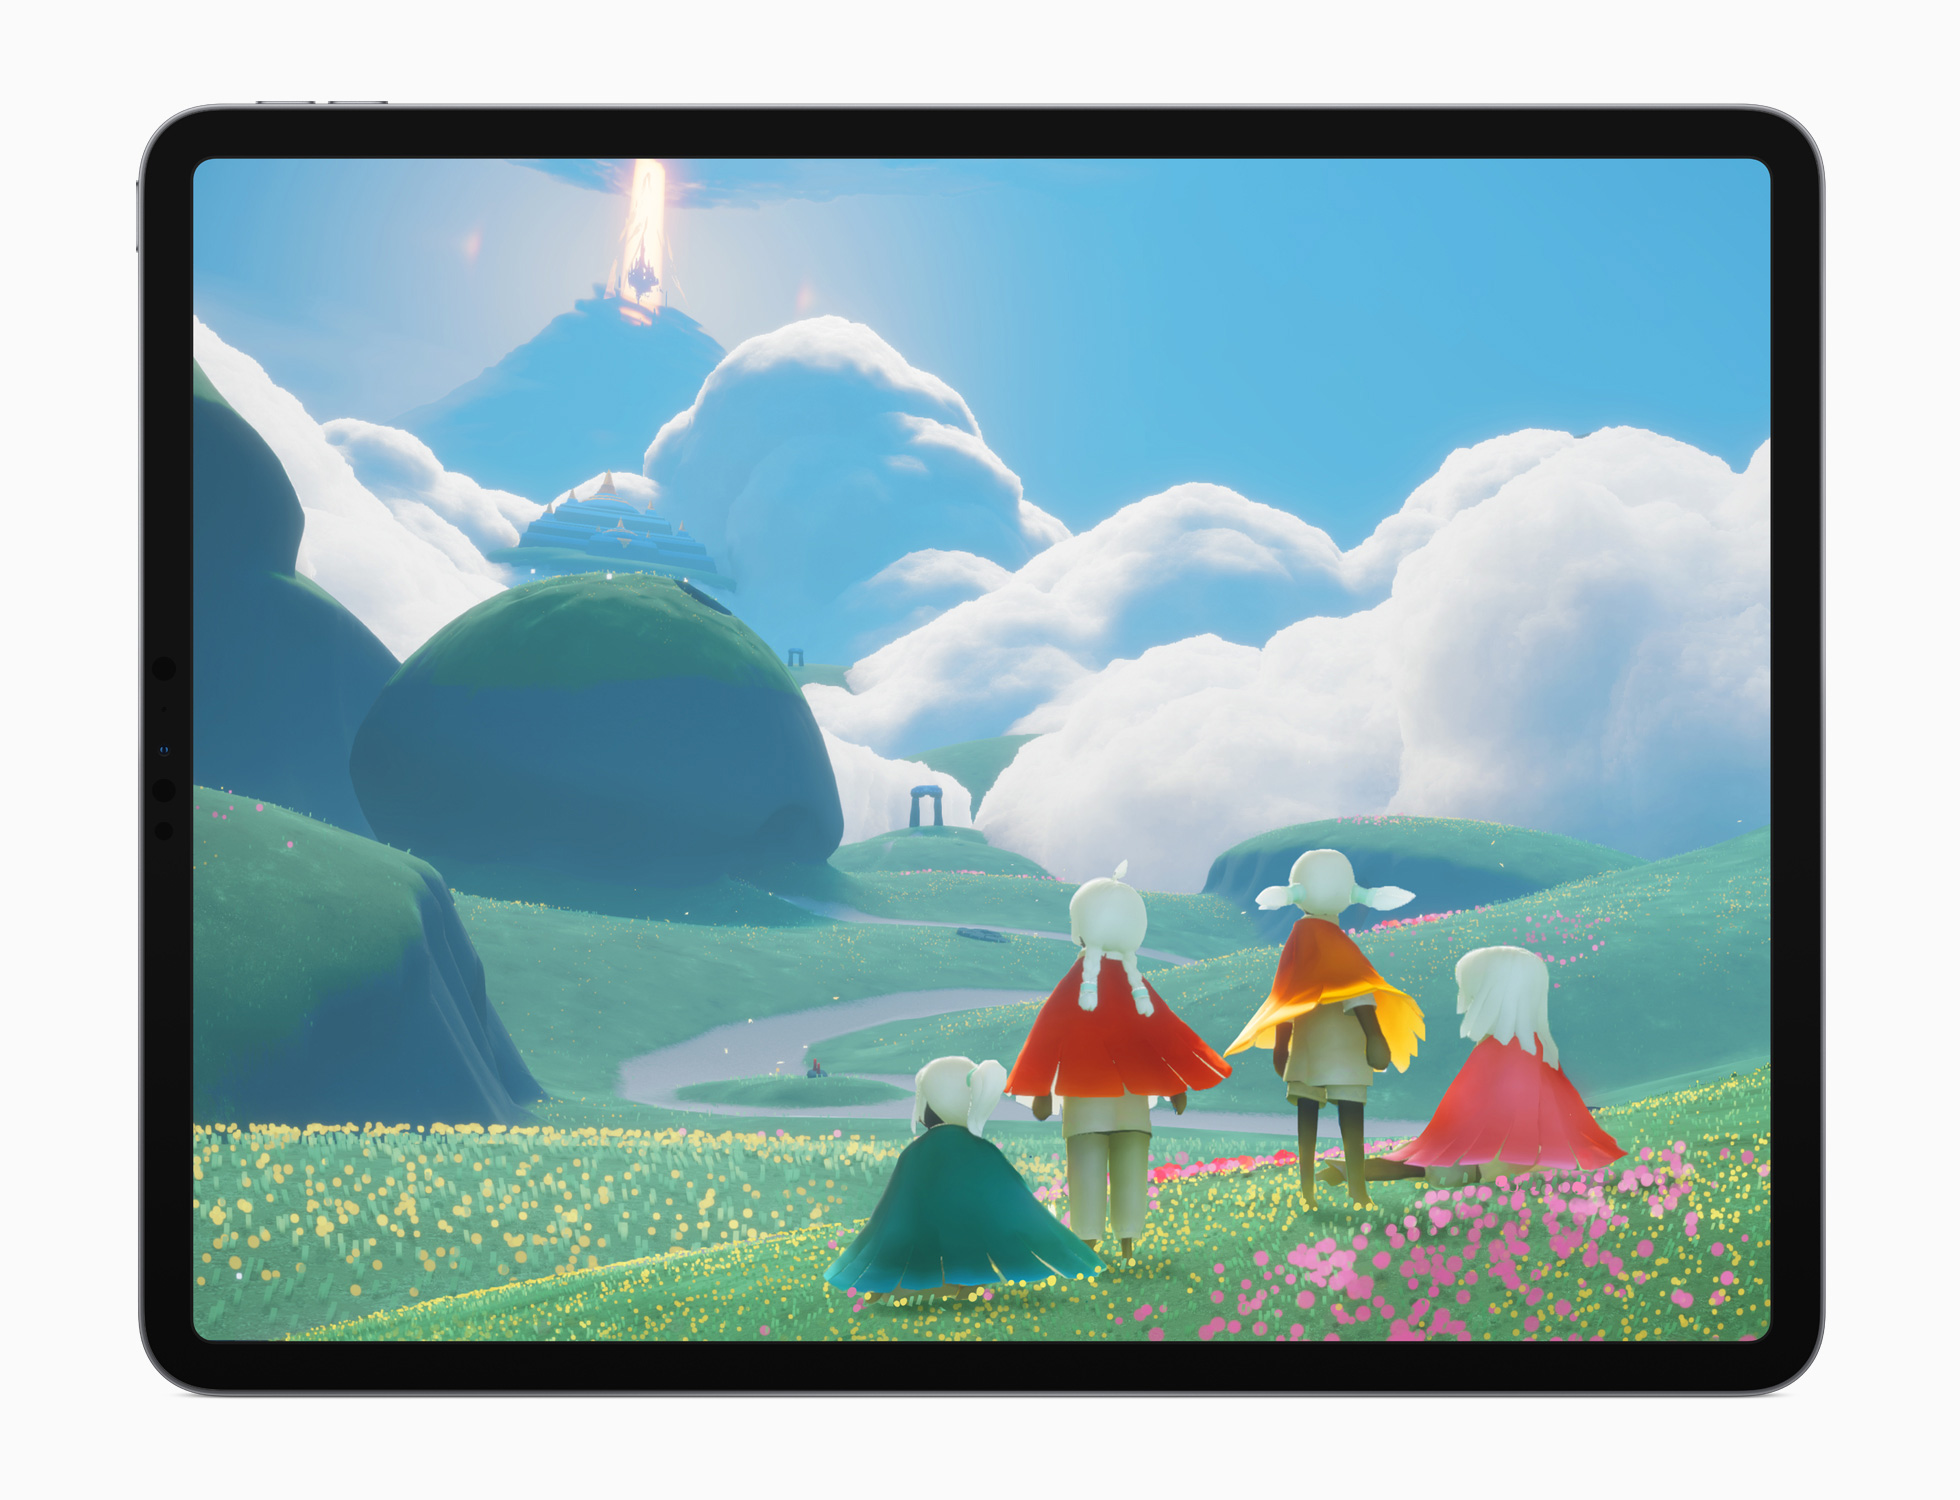 WWDC 2020: ‘Sayonara Wild Hearts’, ‘Sky: Children of the Light’, ‘Where Cards Fall’, and ‘Song of Bloom’ Win Apple Design Awards